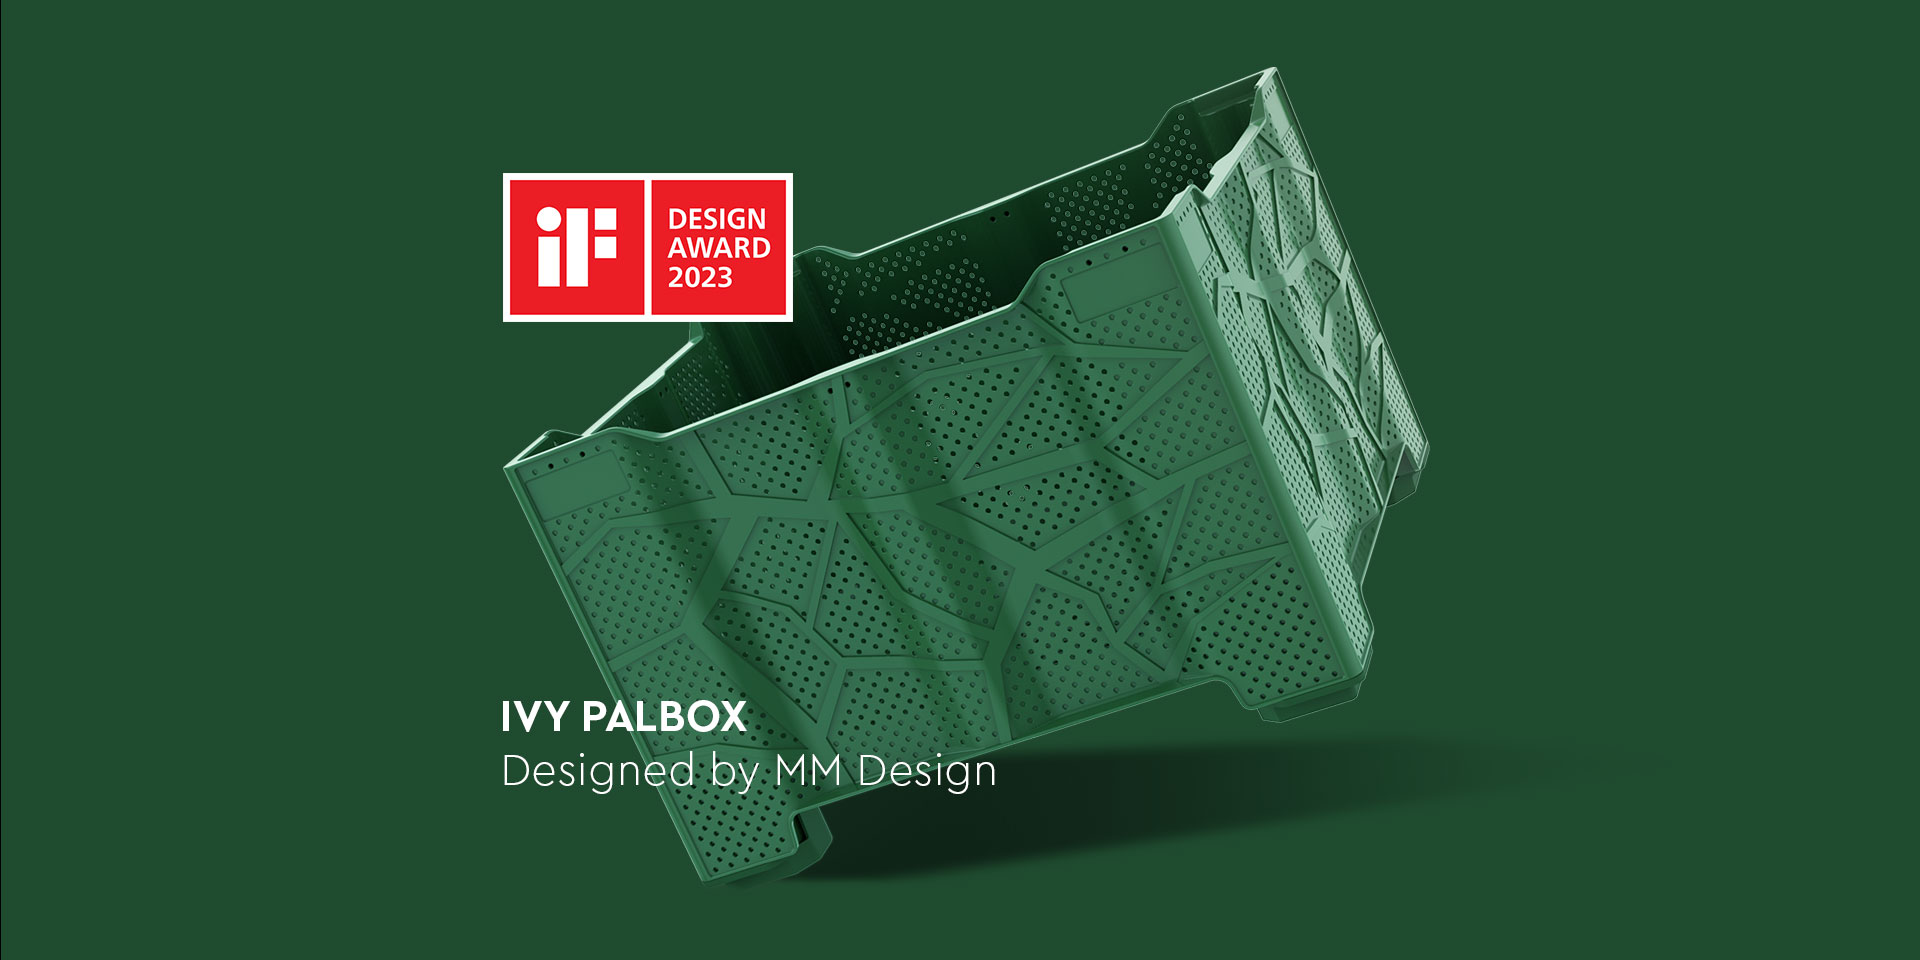 New success story for Palbox and MM Design